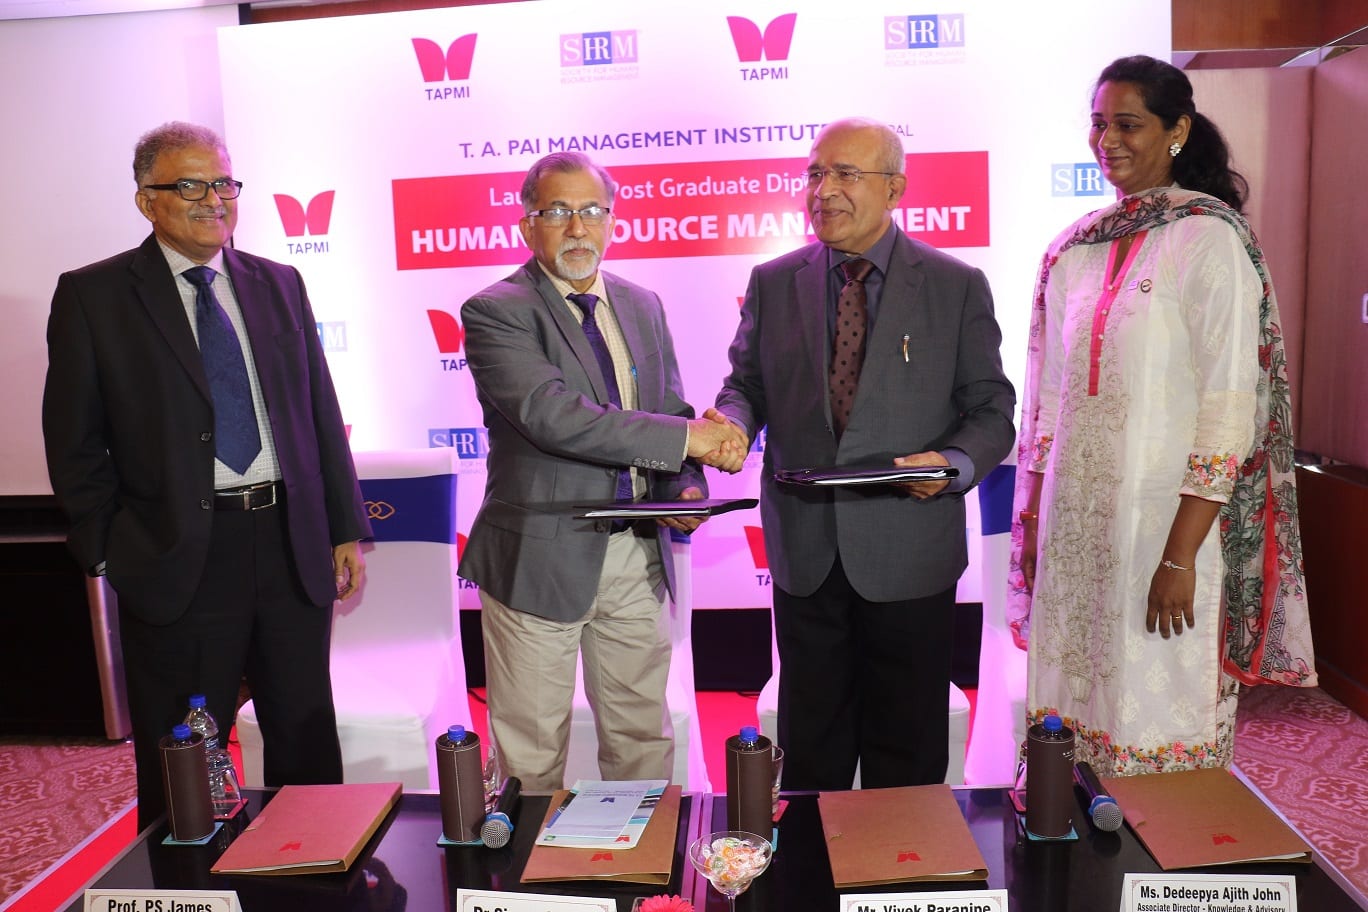 TAPMI In collaboration with Society for Human Resources (SHRM) launches Postgraduate program in Human Resources Management